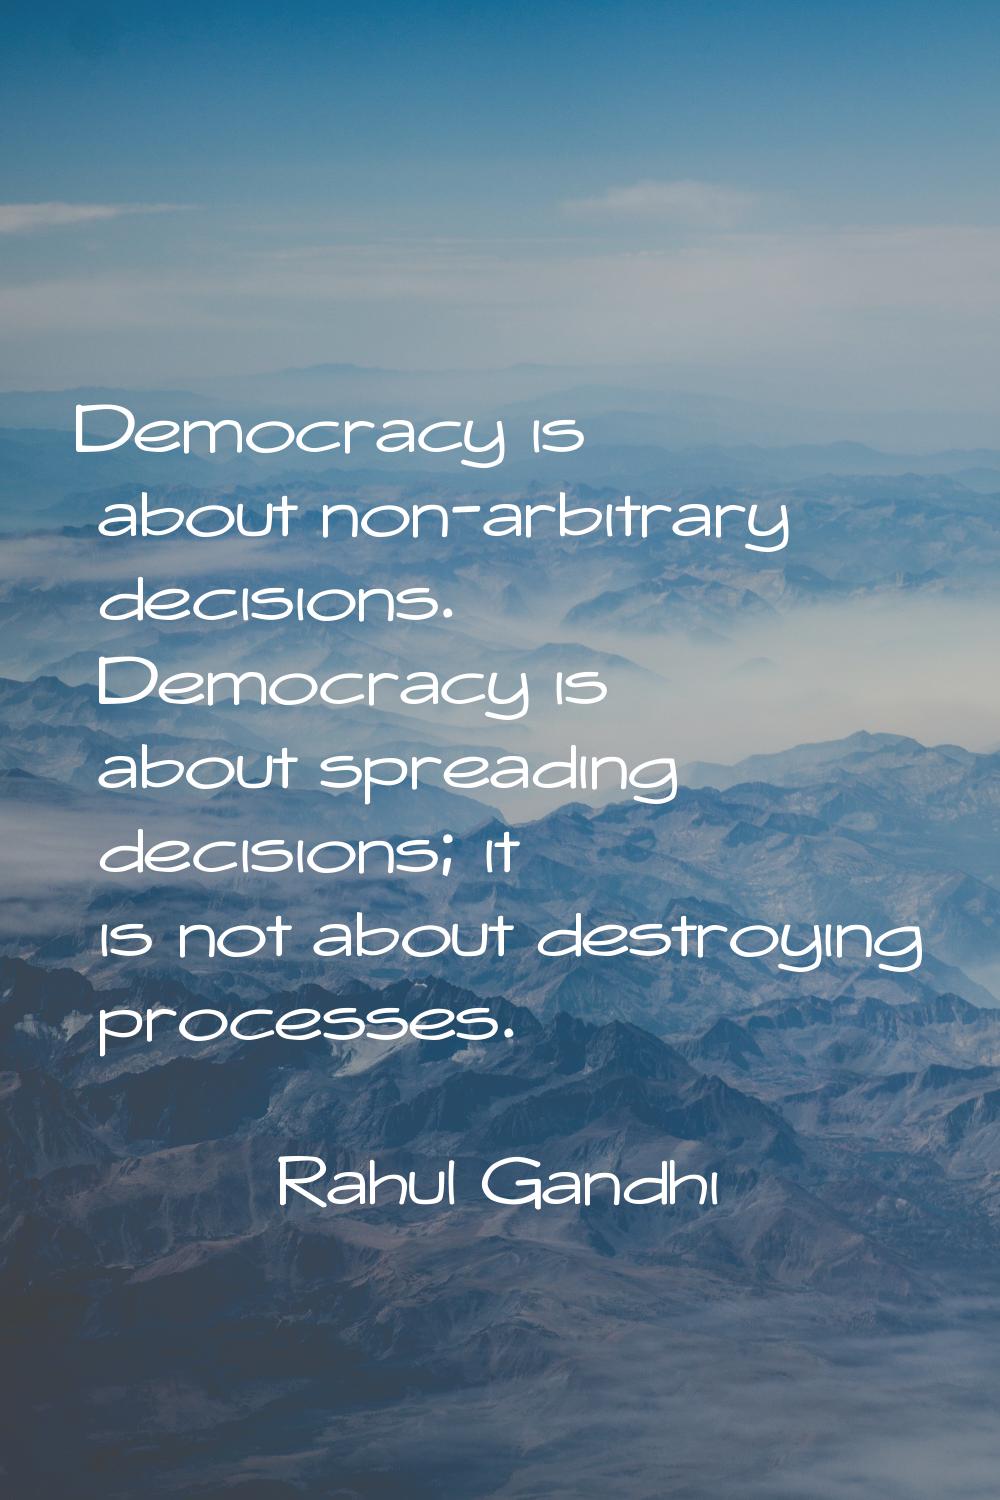 Democracy is about non-arbitrary decisions. Democracy is about spreading decisions; it is not about